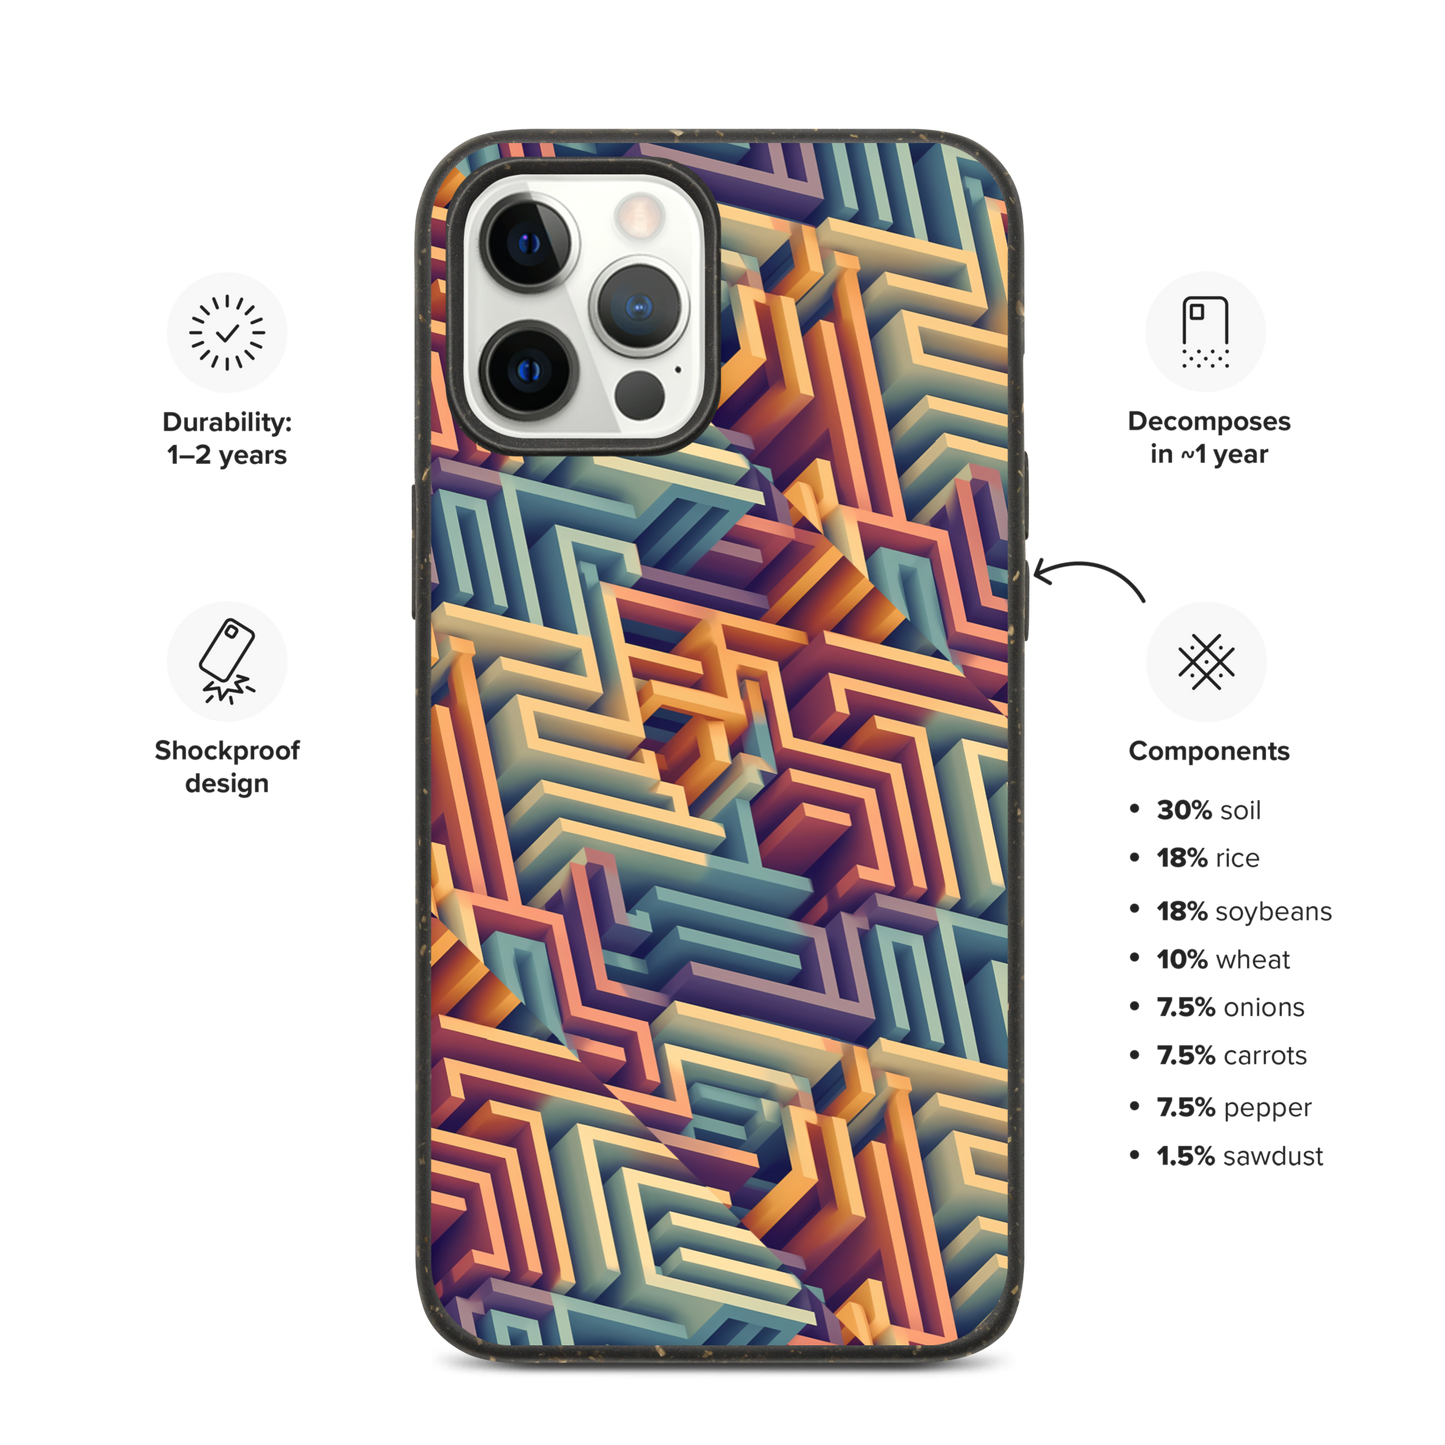 3D Maze Illusion | 3D Patterns | Speckled Case for iPhone - #3